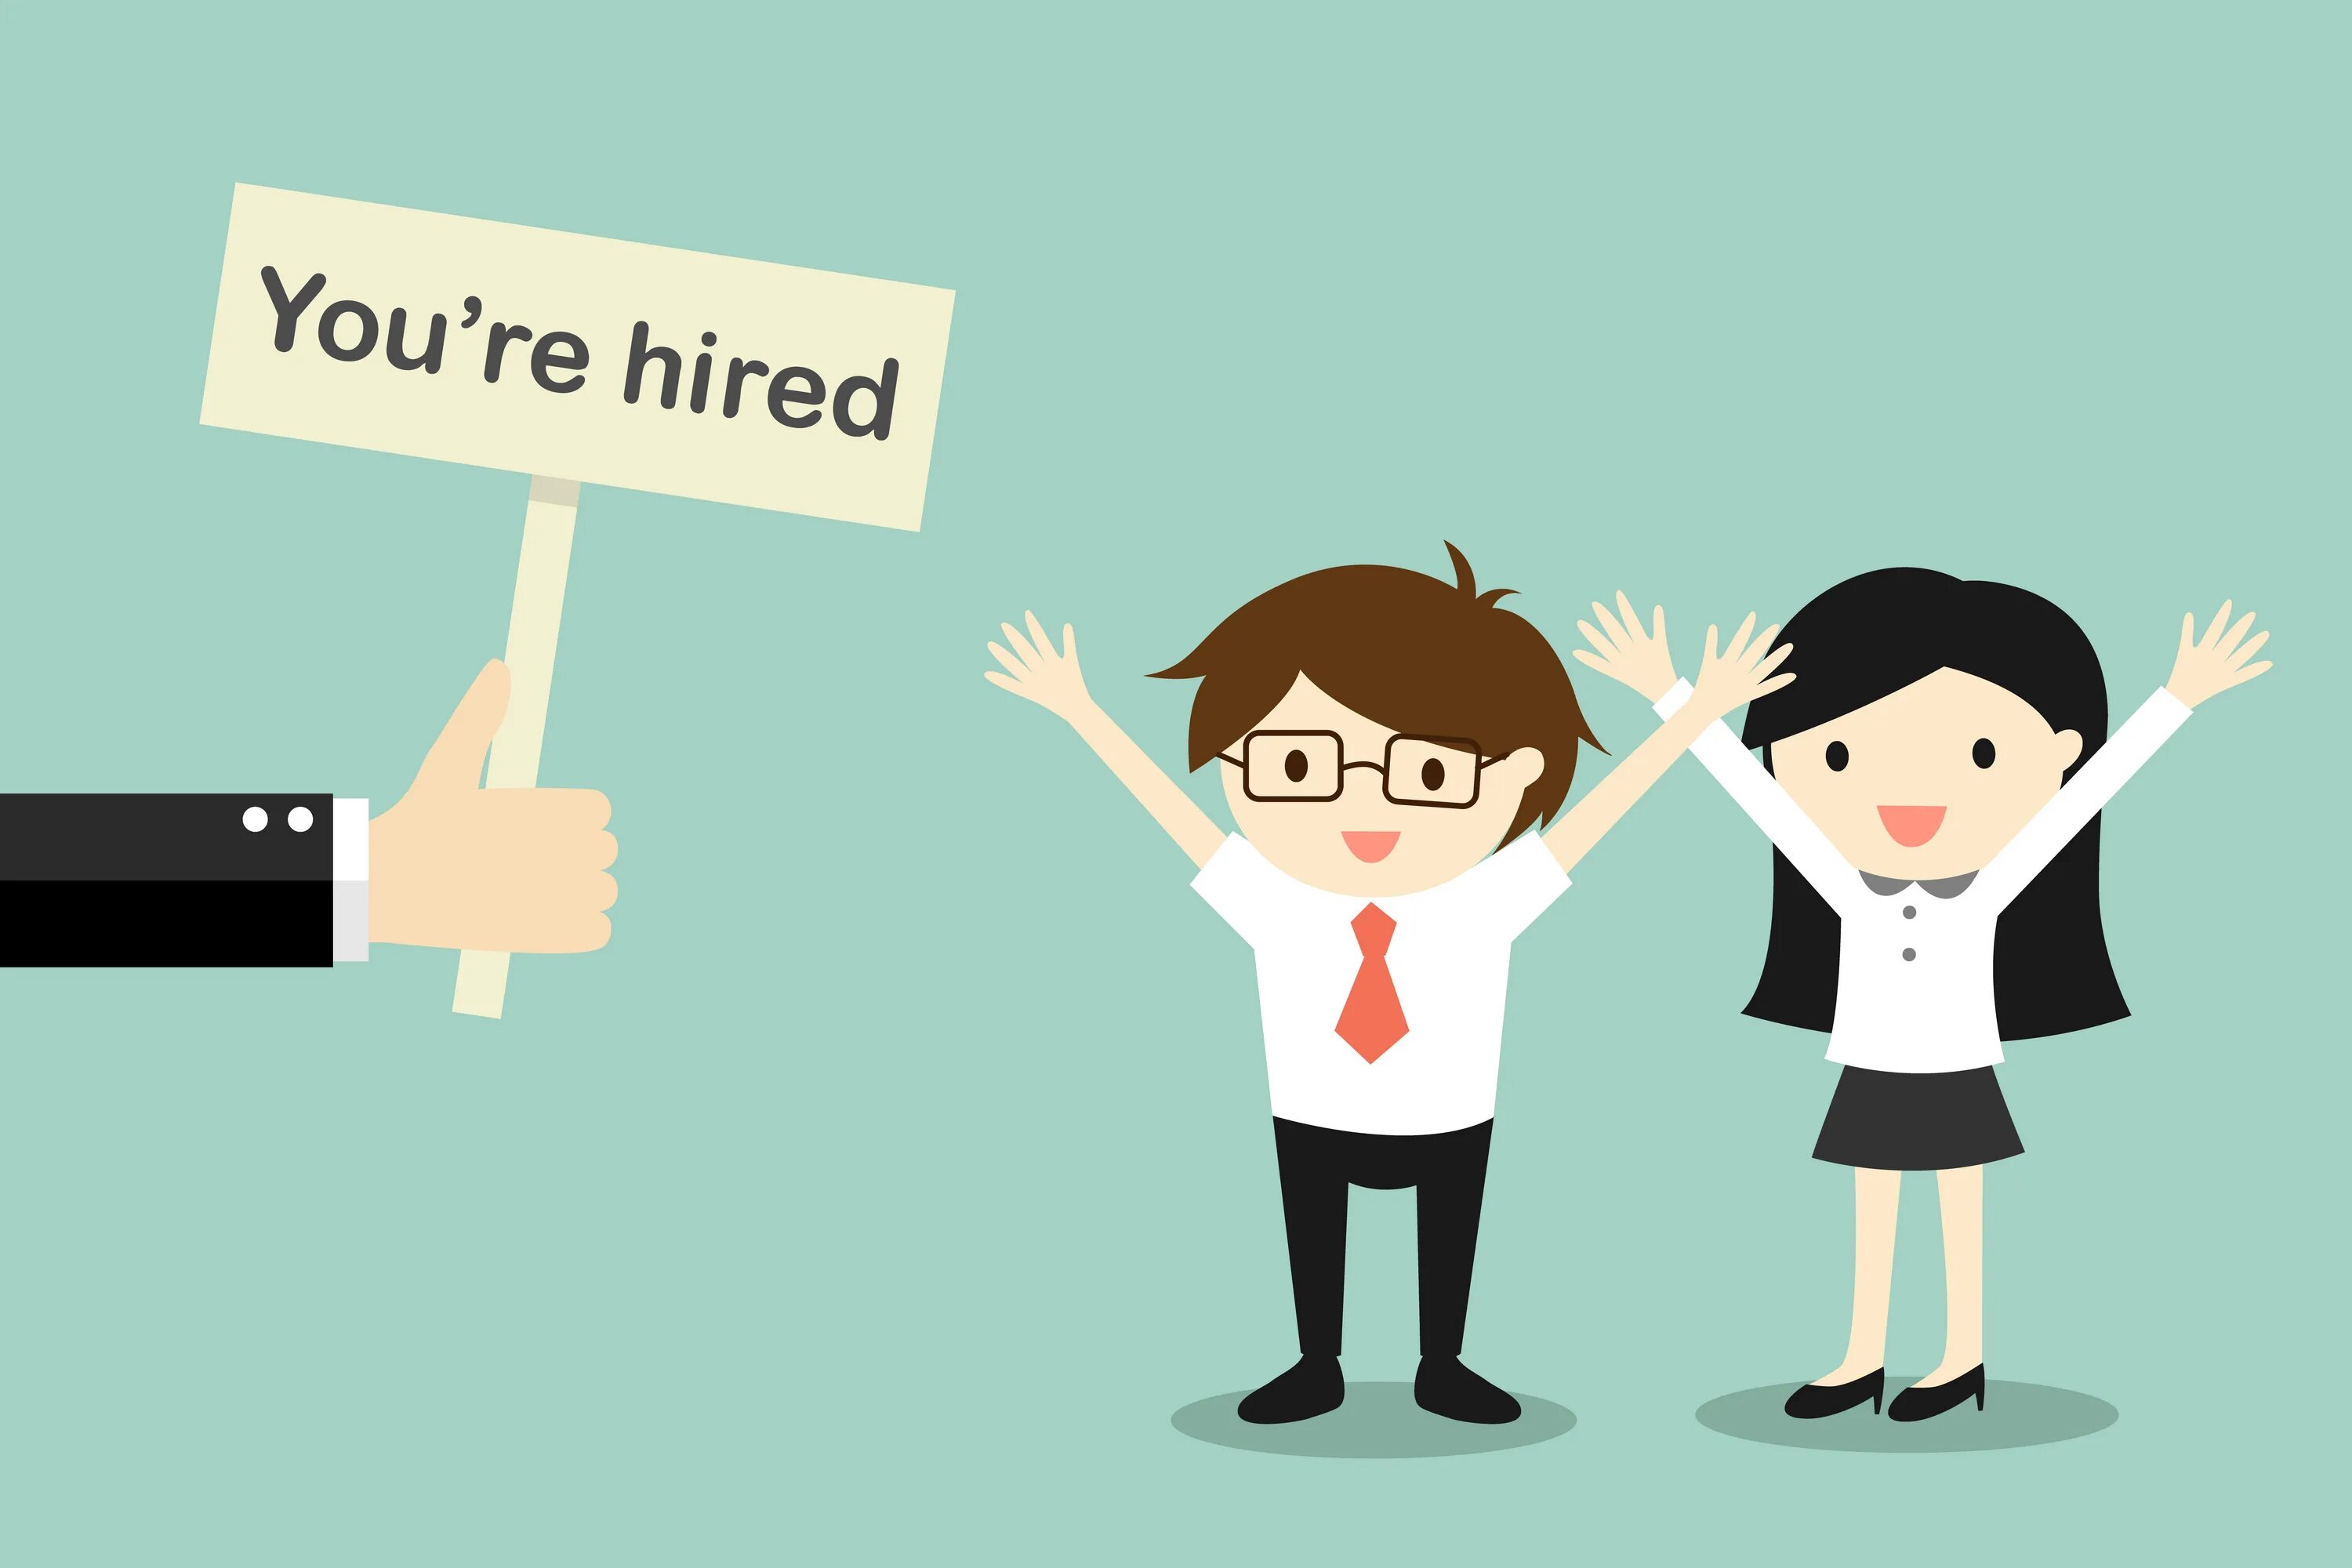 You are hired. Get promoted. Get a promotion. Промоушн (promotion). C promotion